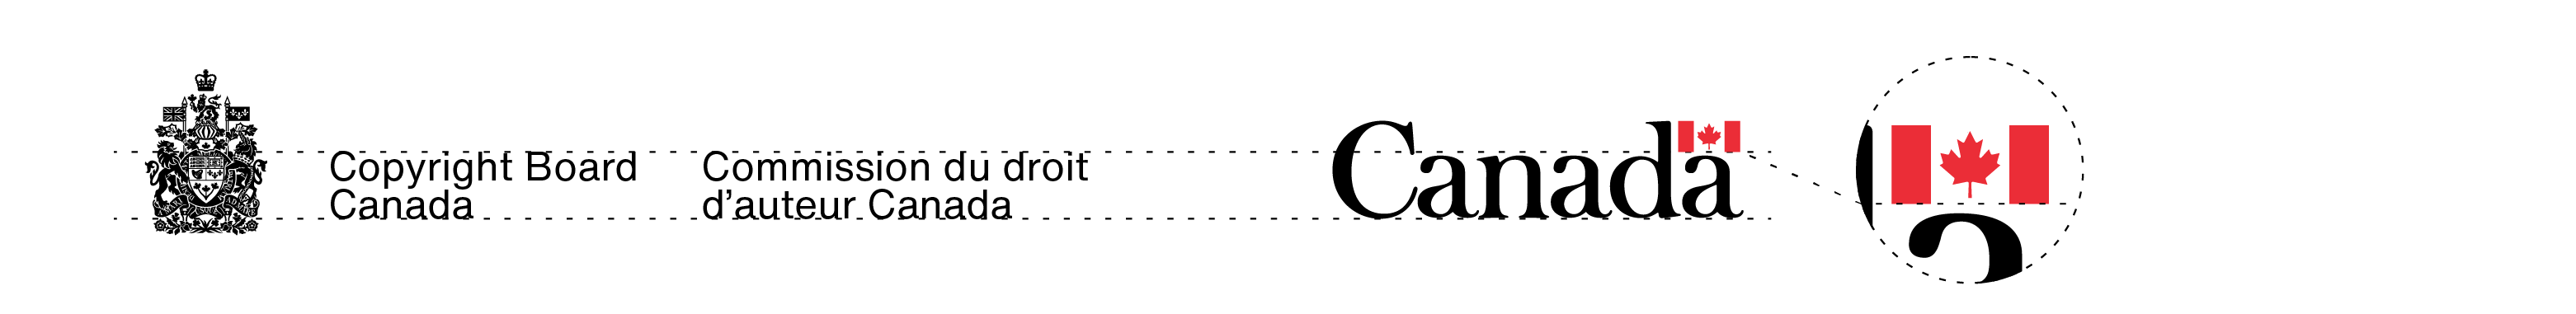 The arms signature for the Copyright Board Canada and the Canada wordmark in their standard colours. The size relationship is explained in text above.